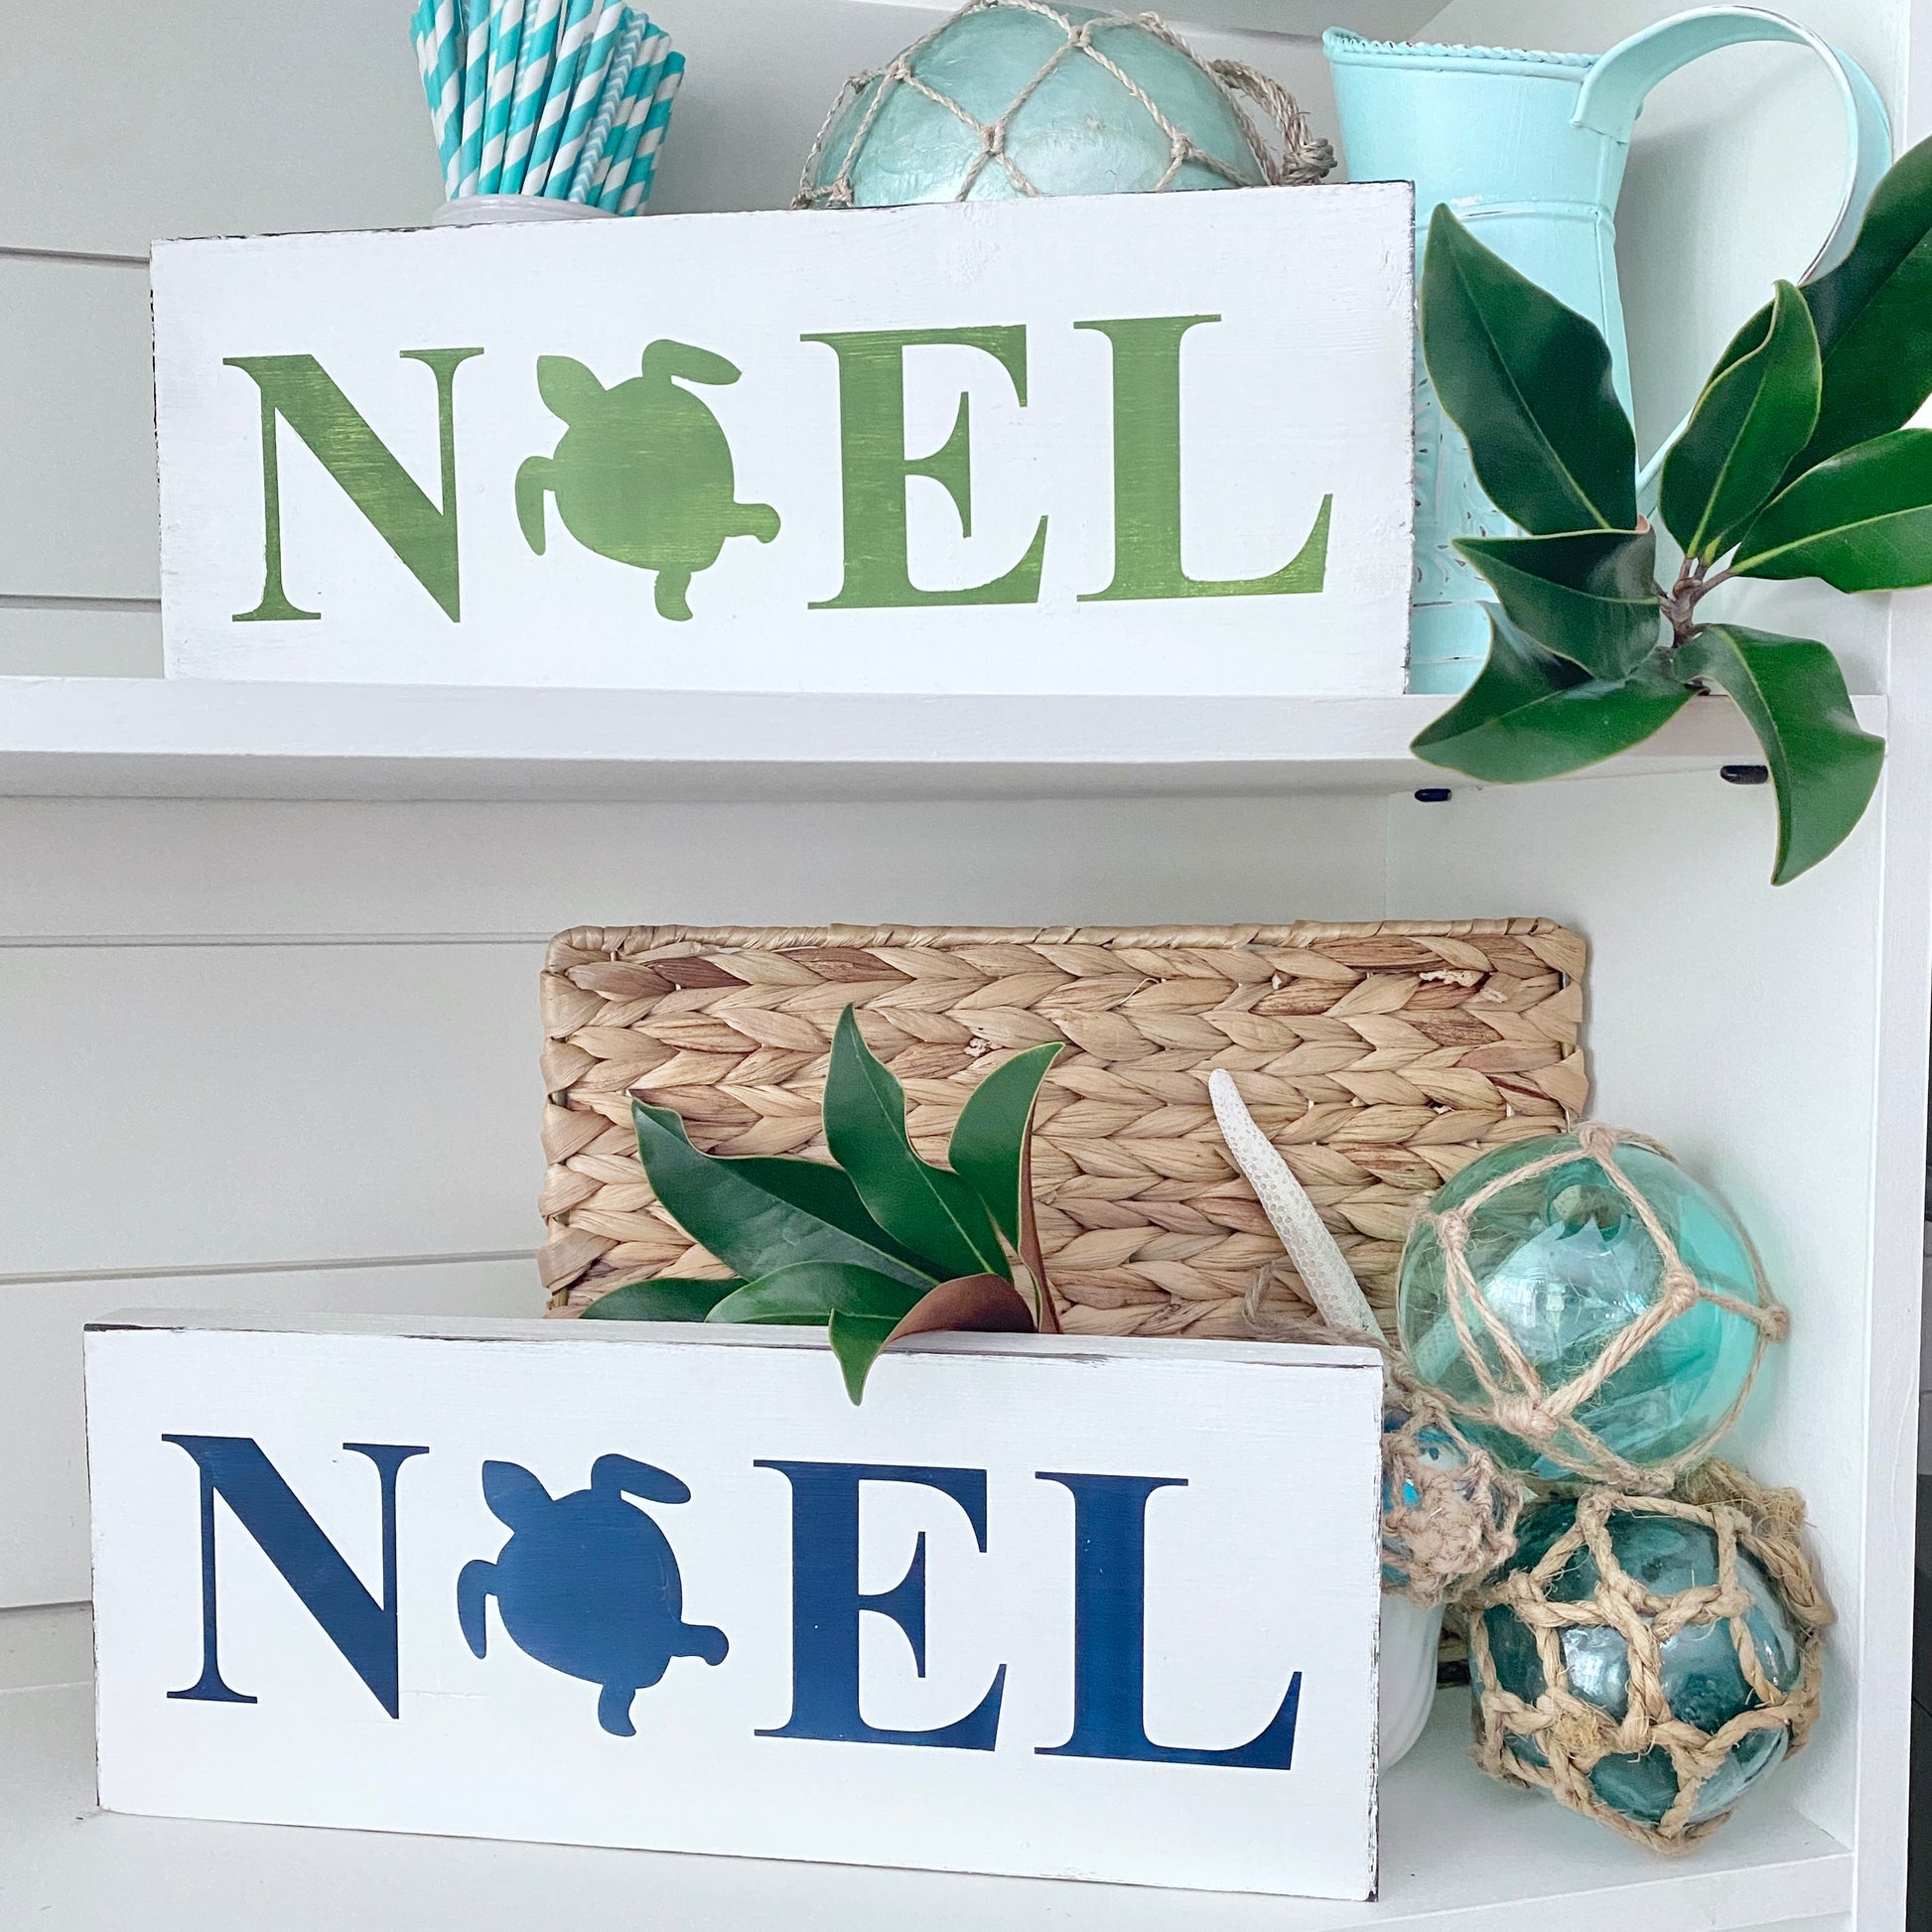 Coastal Christmas Decor, Anchored Soul Designs Noel Sea Turtlee Christmas wood sign white background with green and navy design, beach house holiday decor coastal design